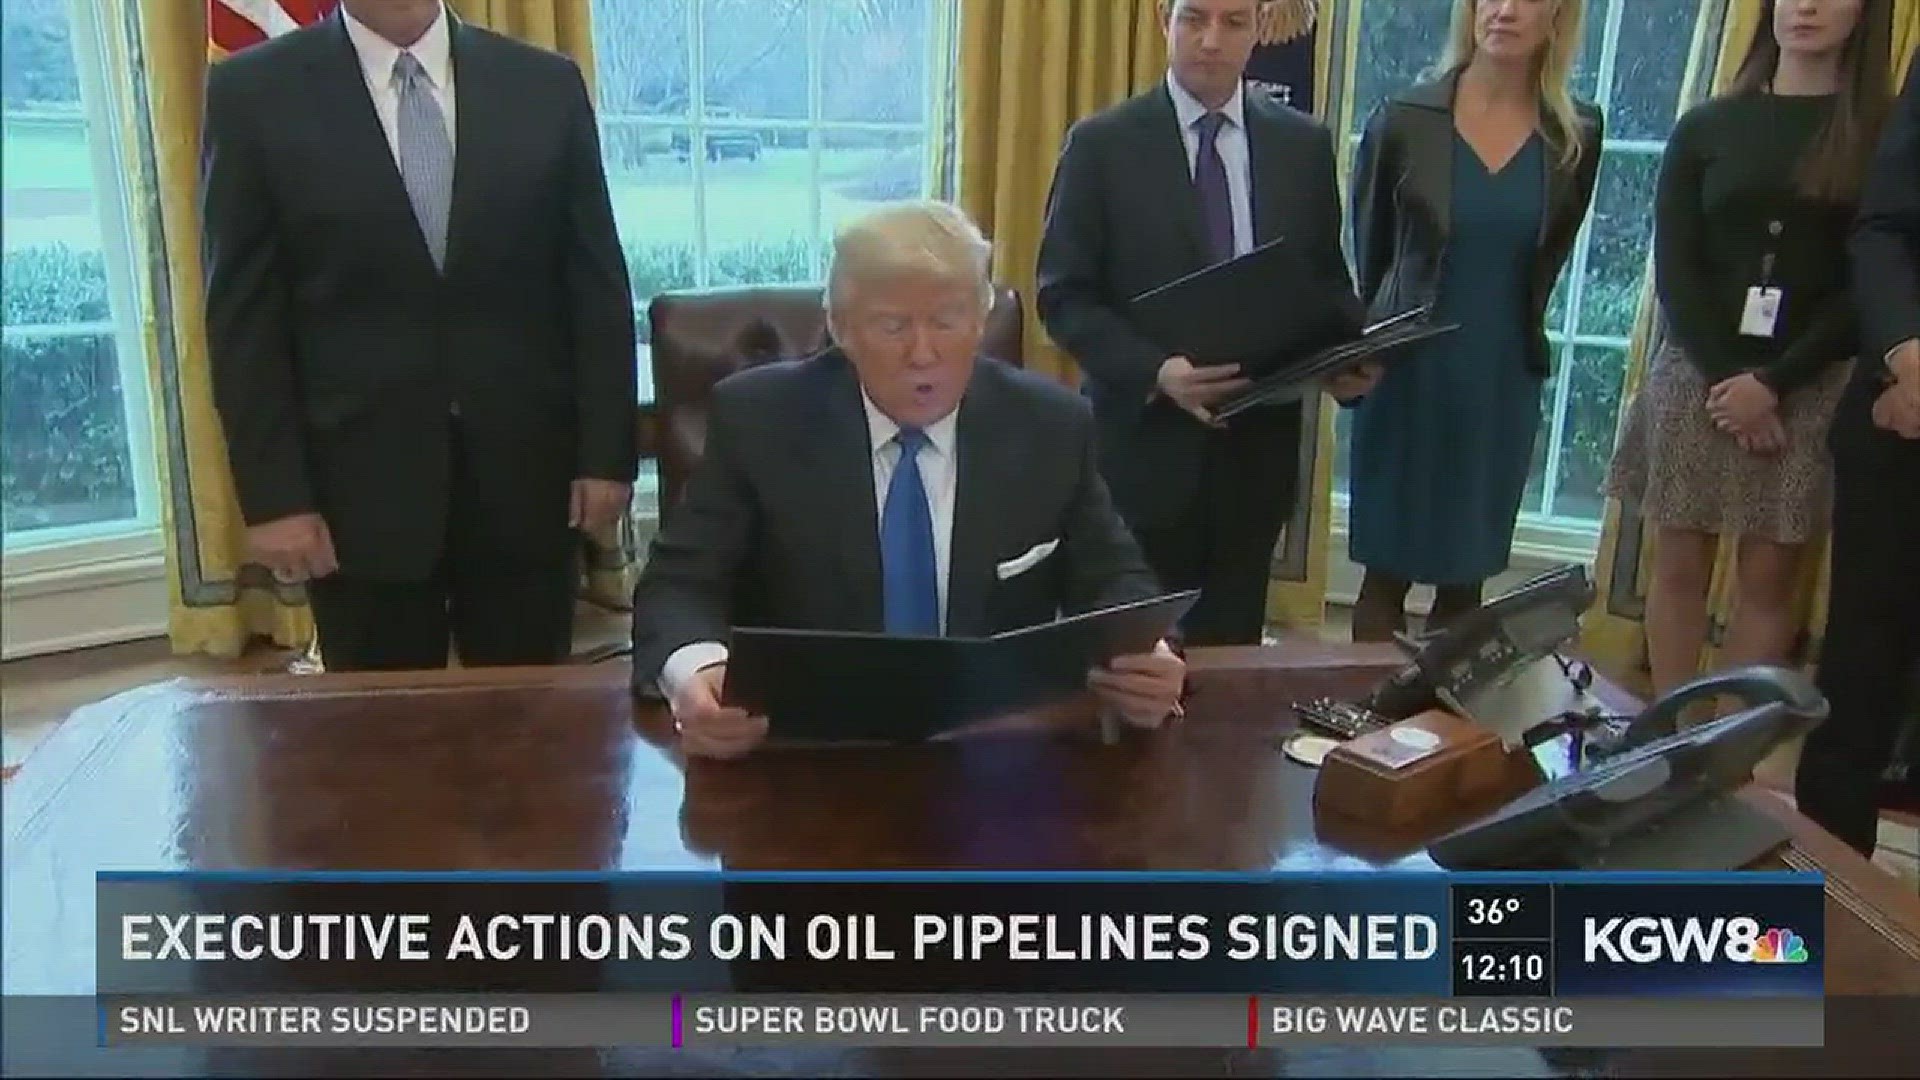 Executive actions on oil pipelines signed